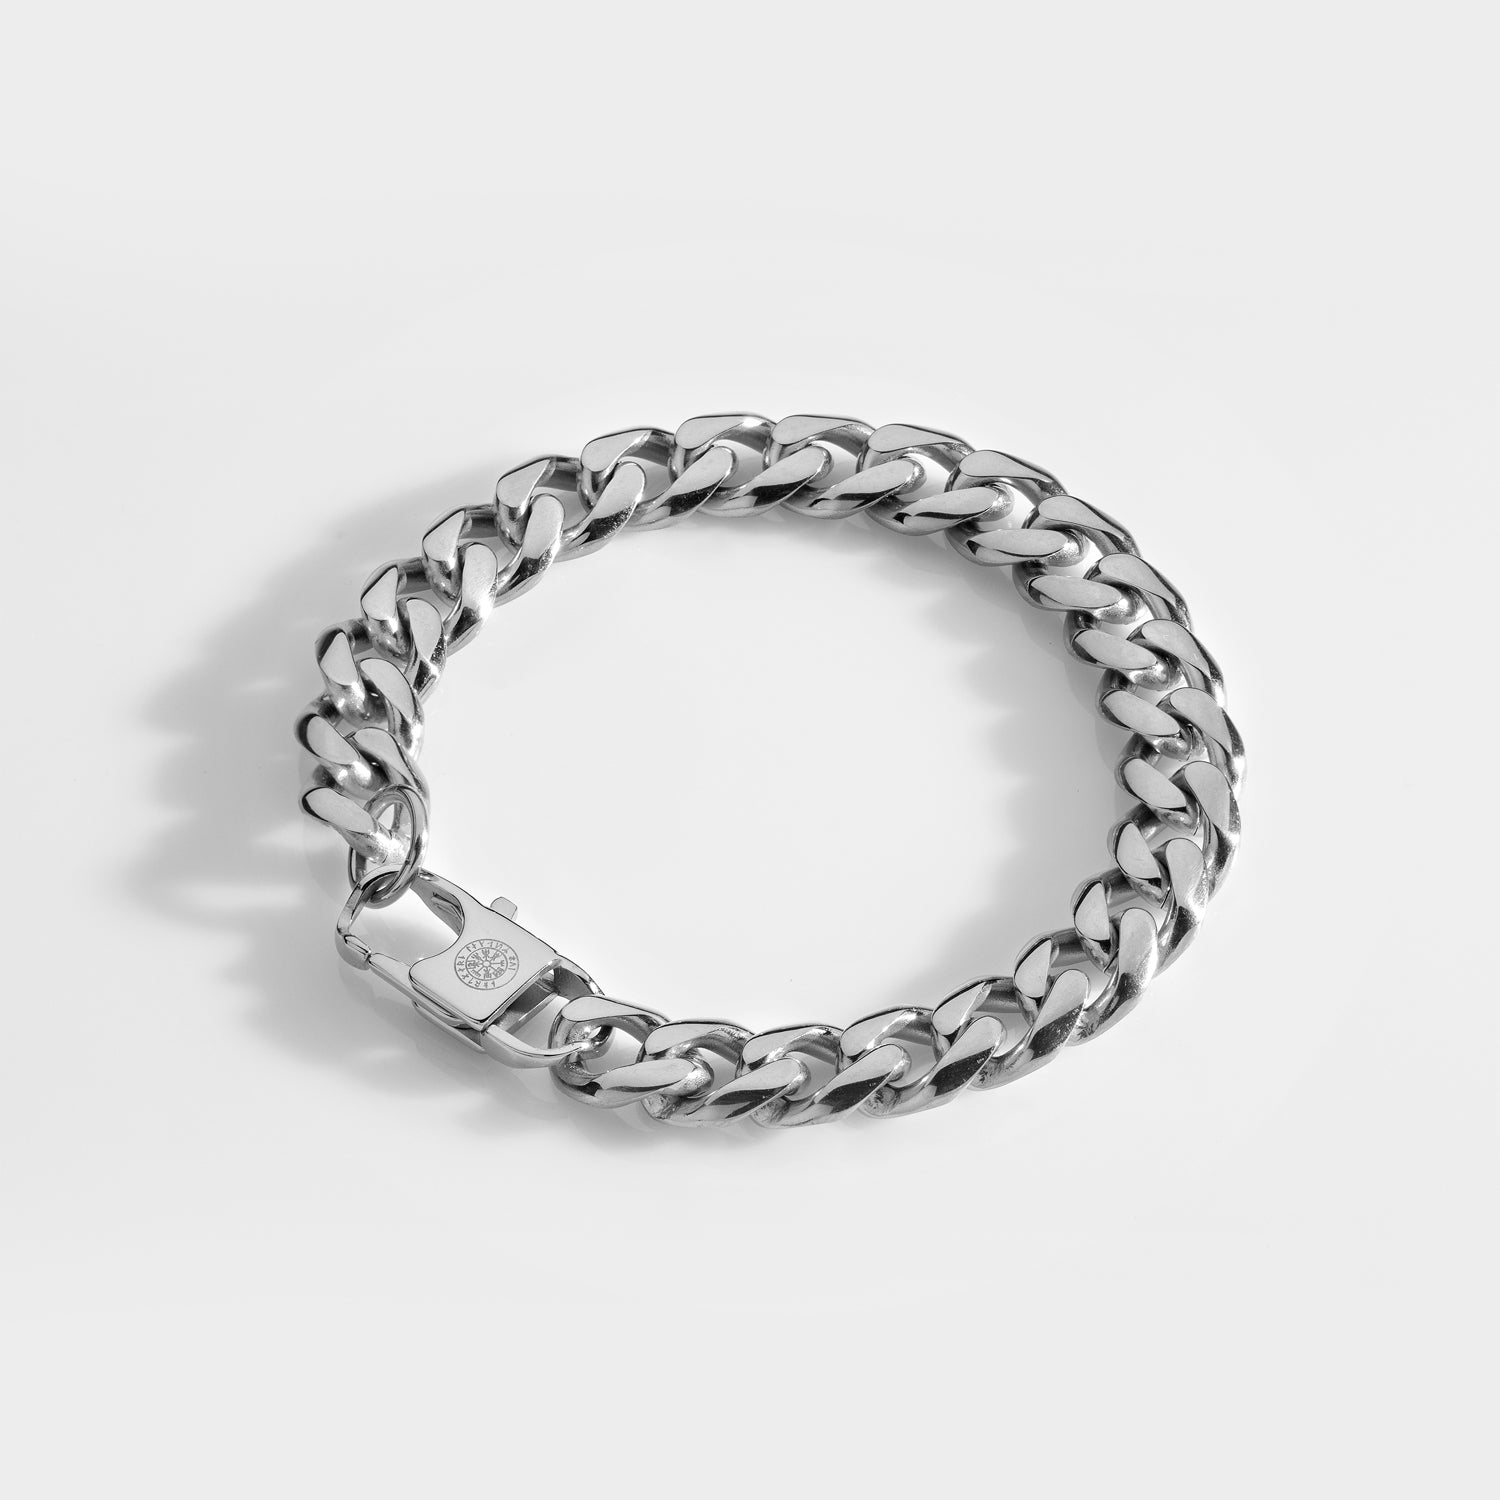 Sequence bracelet - Silver-toned